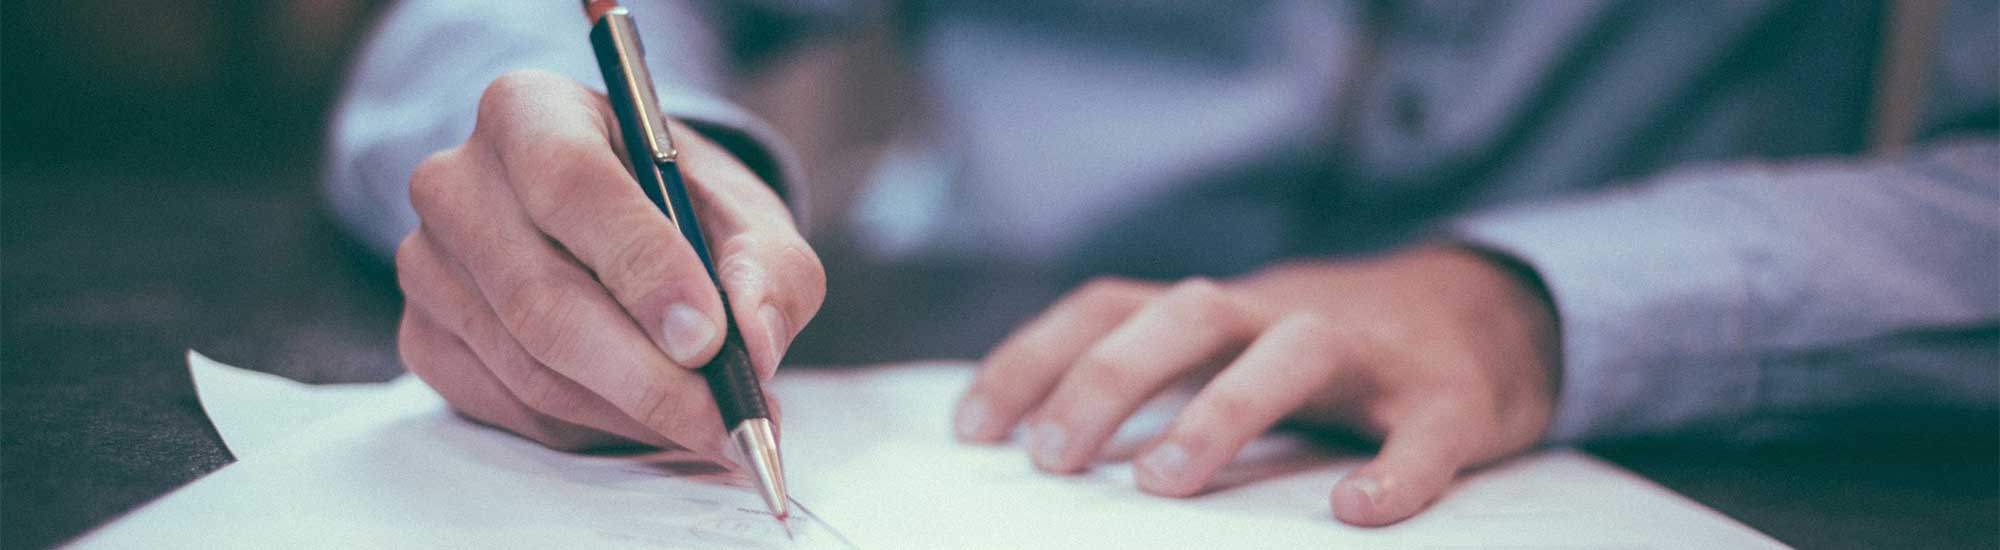 Person writing with pen and paper